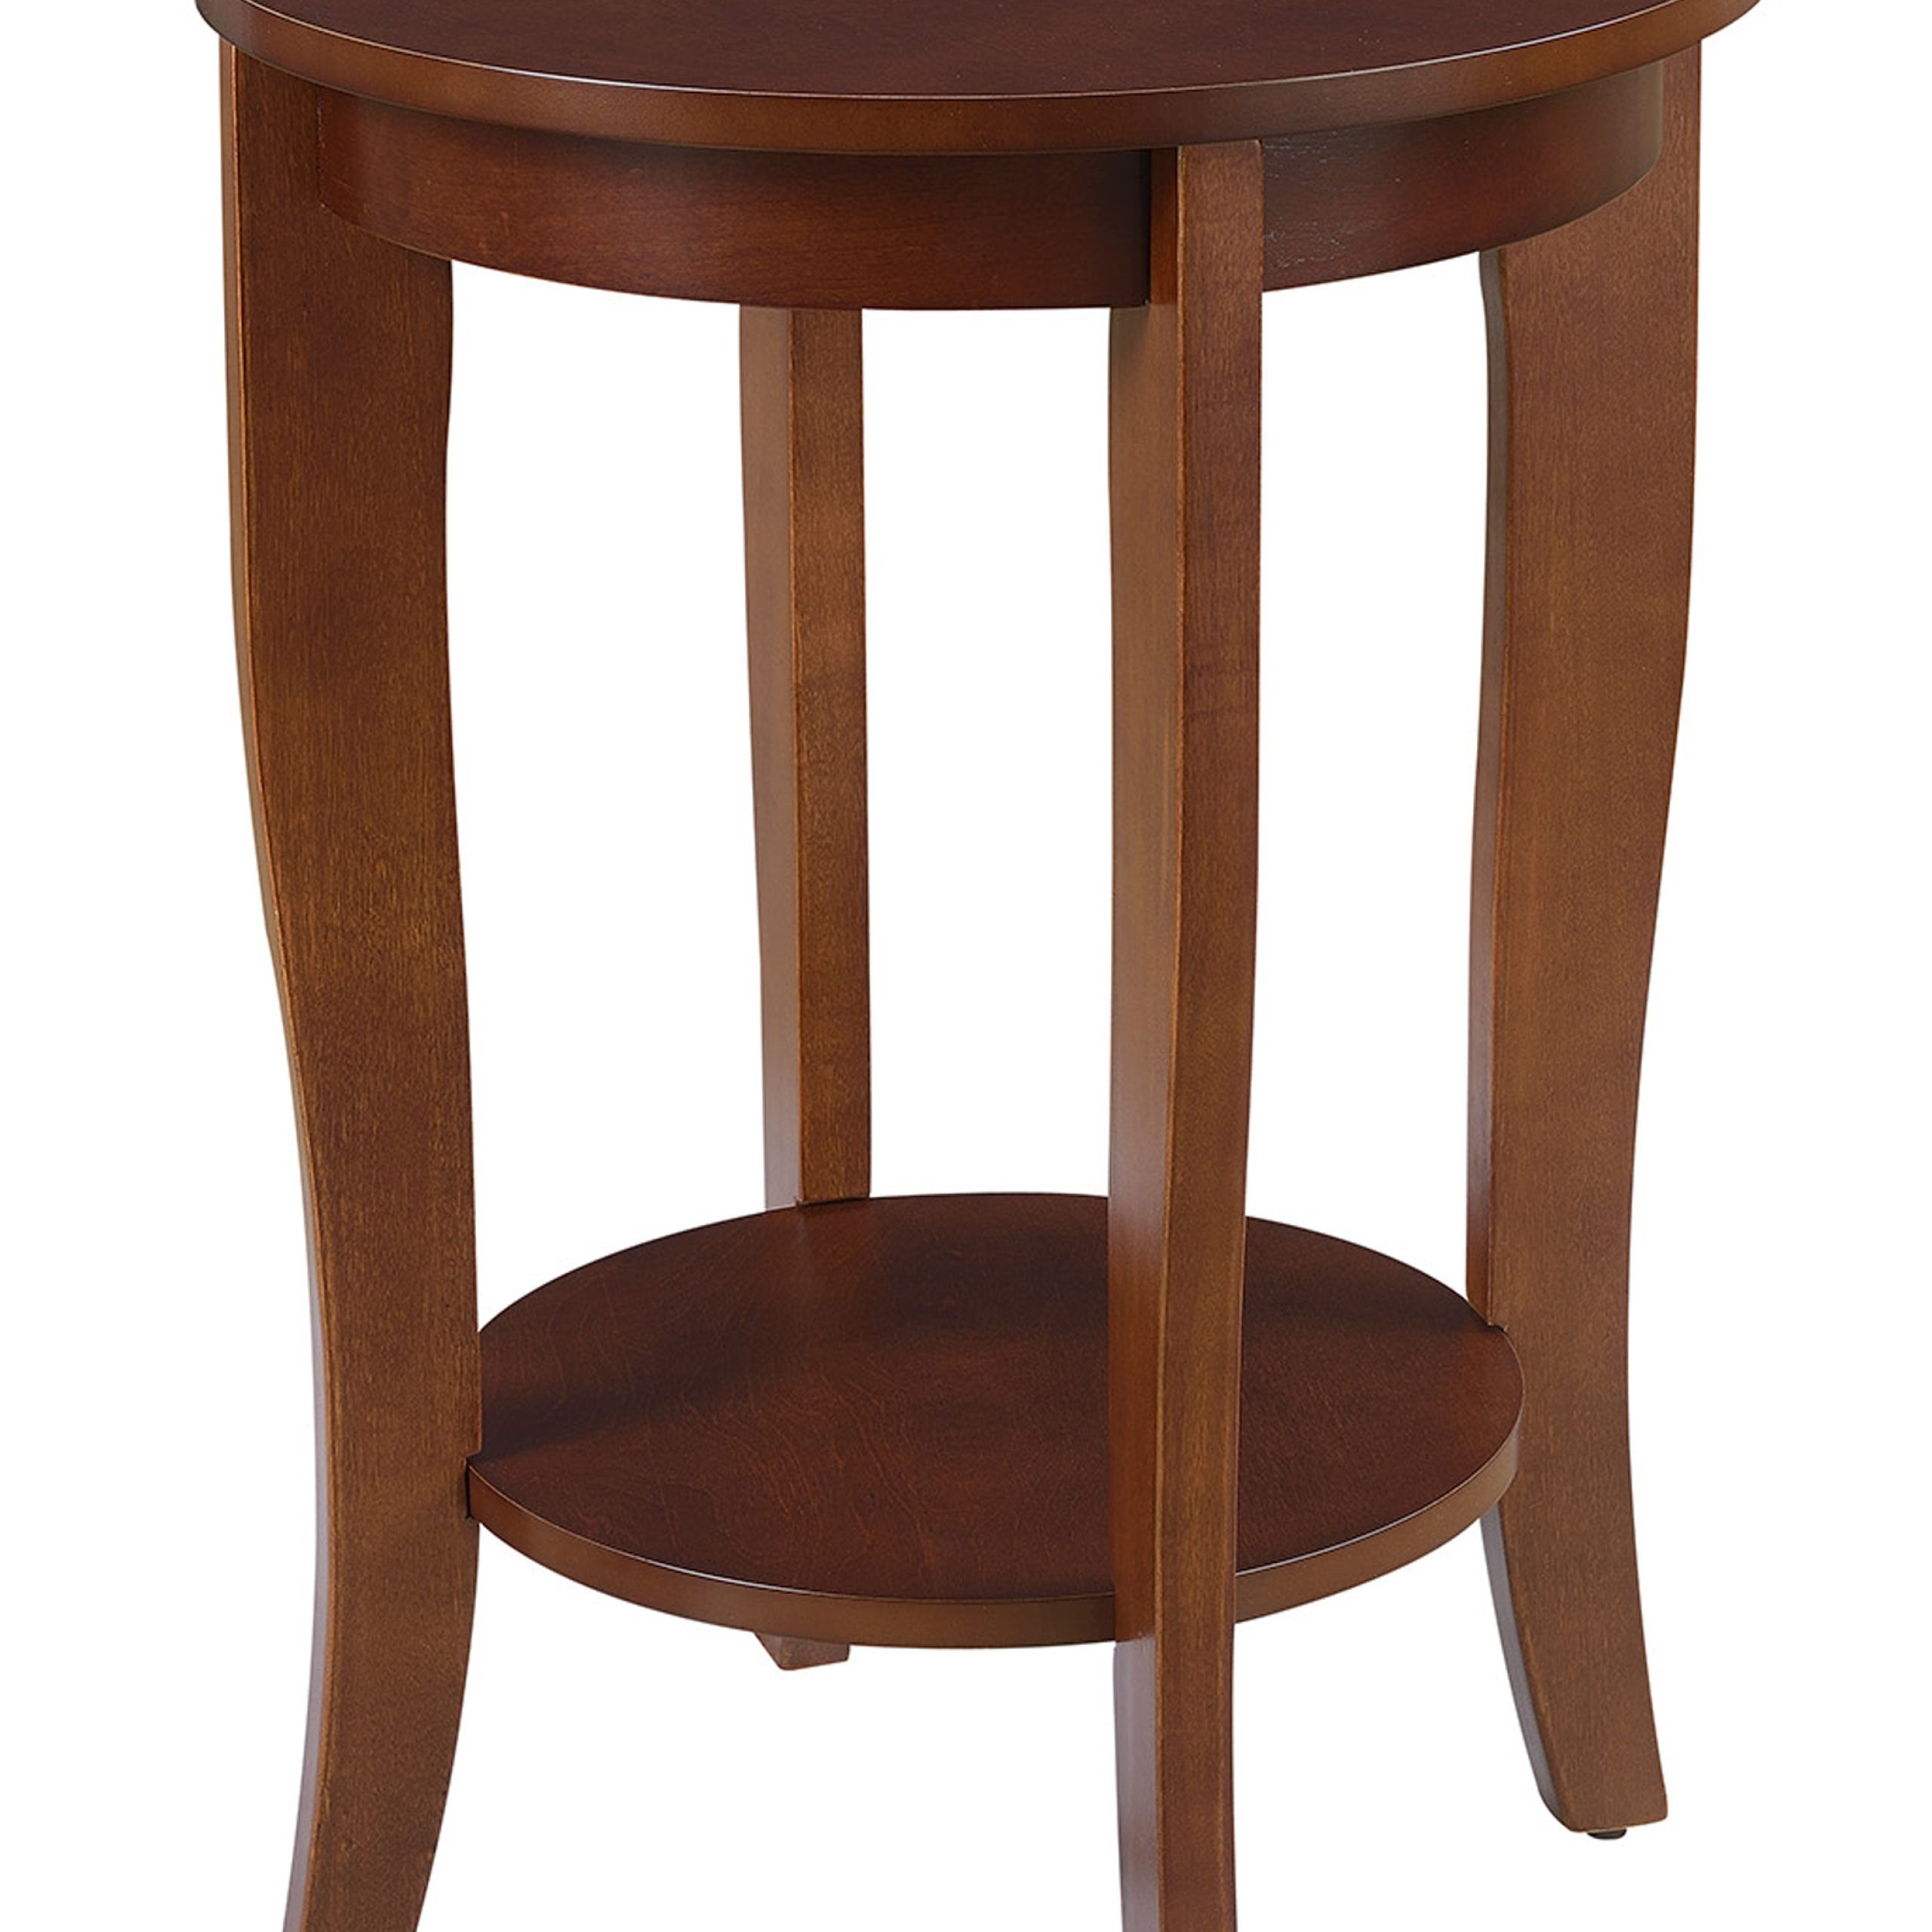 American Heritage Round End Table R6 236, Mahogany Finish 95285418954 Inside American Heritage Round Coffee Tables (View 9 of 20)